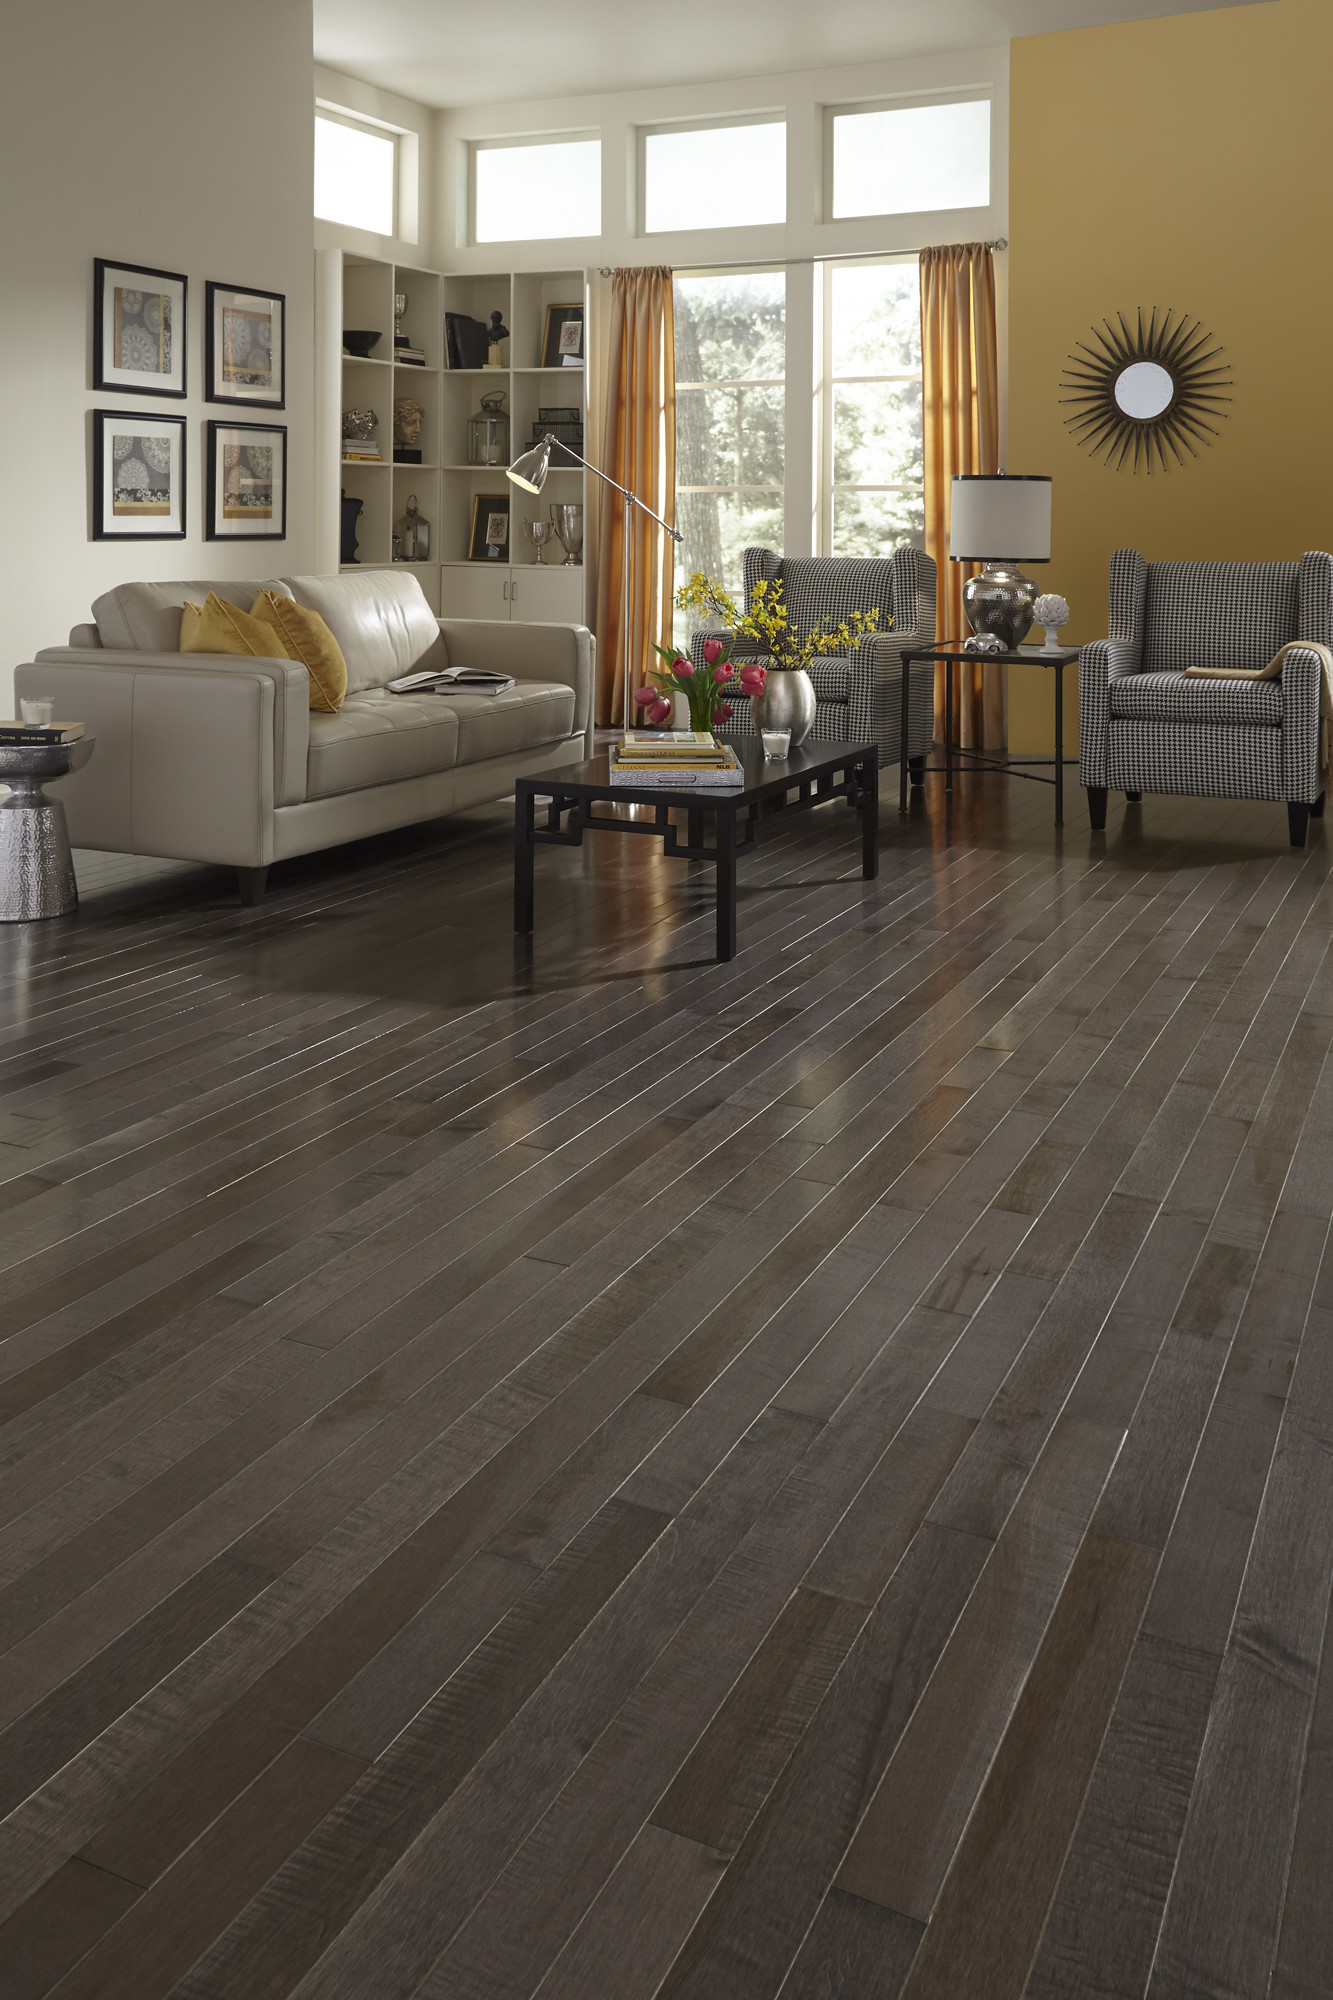 21 Elegant Can You Lay Hardwood Floors Over Tile 2024 free download can you lay hardwood floors over tile of how to lay a floating floor it s easy and fast to install plank throughout tiles hardwood floor vacuum cost to how to lay a floating floor august s t